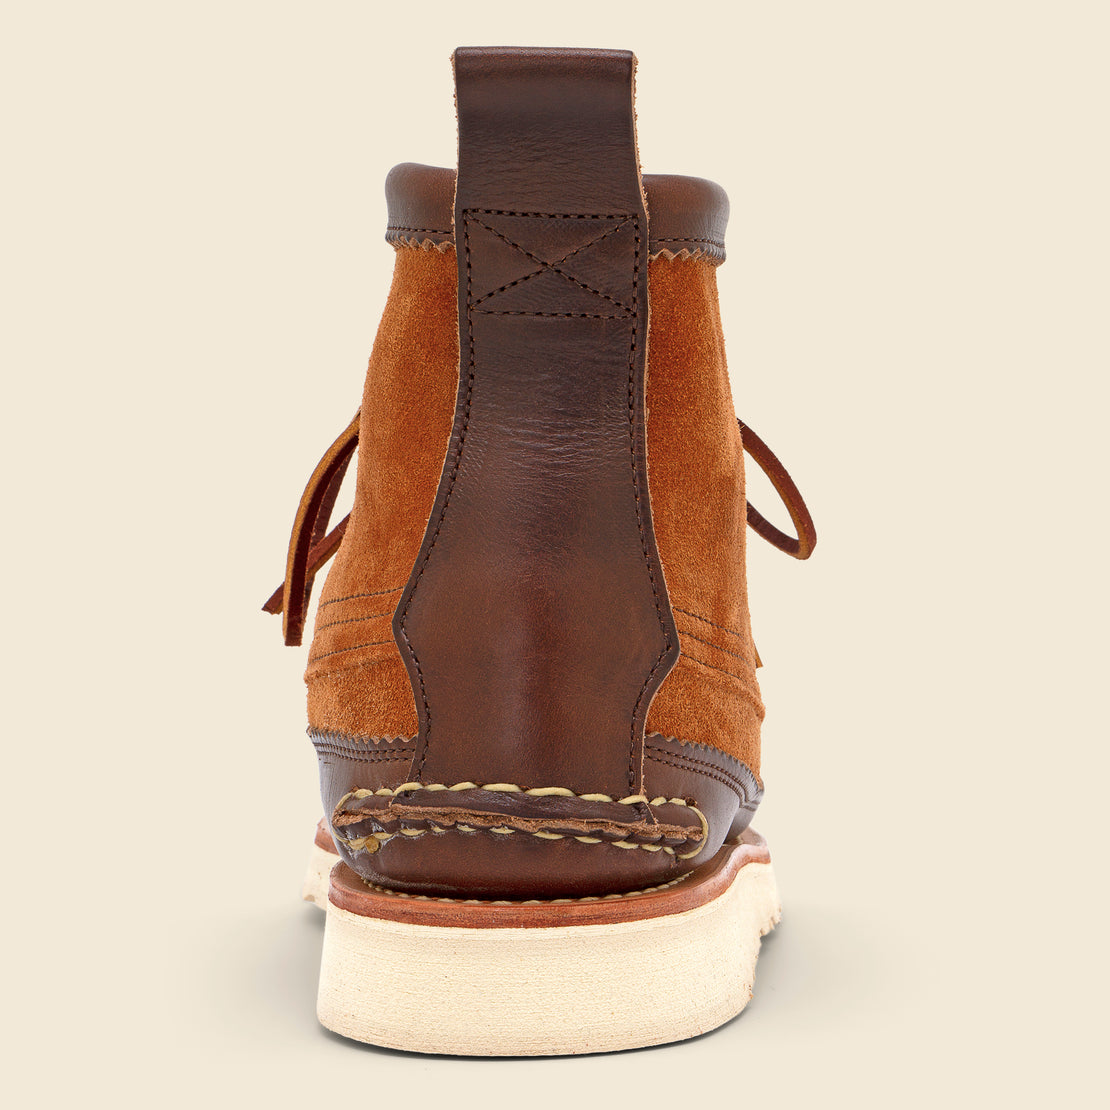 Maine Guide 6 Eye DB Boots - FO G Brown x G Brown - Yuketen - STAG Provisions - Shoes - Boots / Chukkas